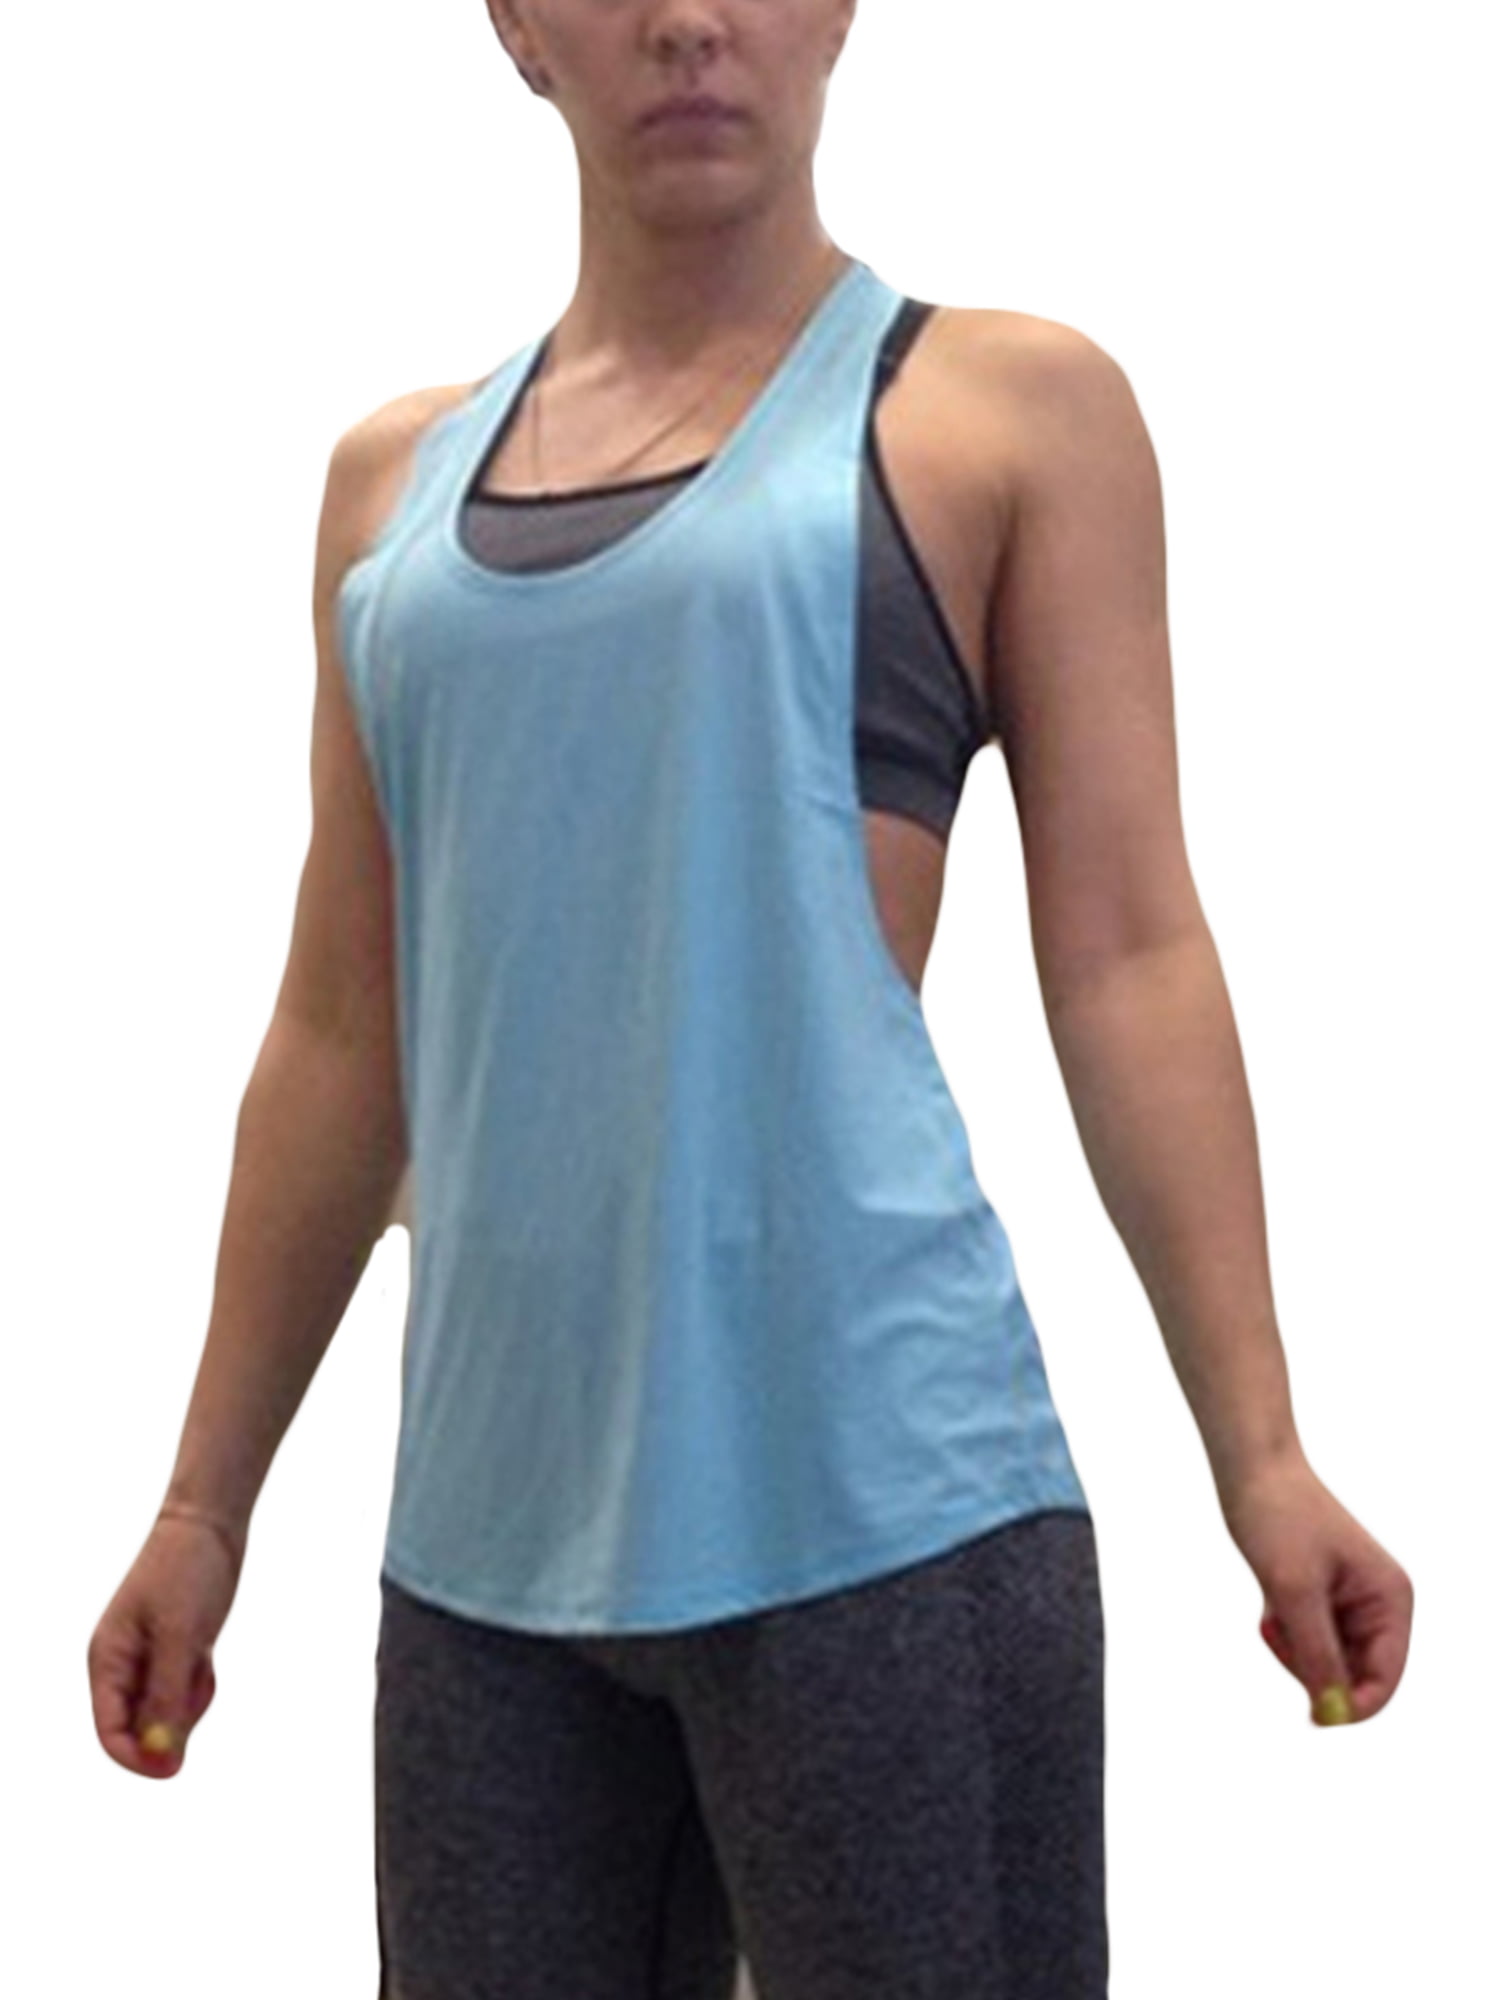 Women's Slim Sleeveless T-Shirt Solid Color Knitted O-Neck Tight Vest Sports Workout Tank Tops